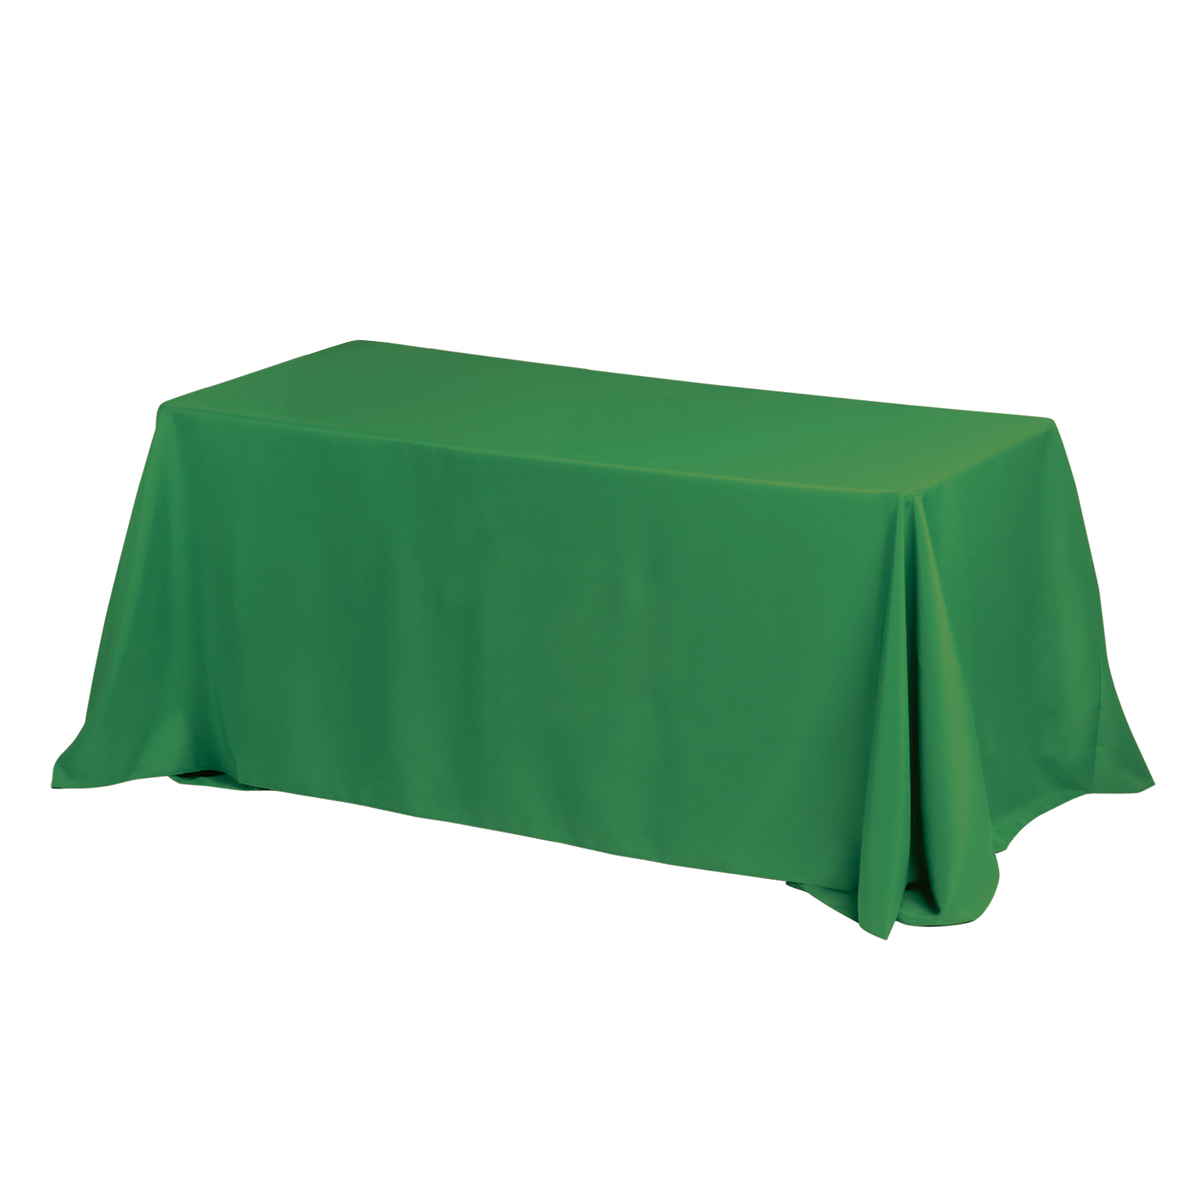 "PREAKNESS SIX" 3-Sided Economy Table Covers & Table Throws -Blanks / Fits 6 ft Table